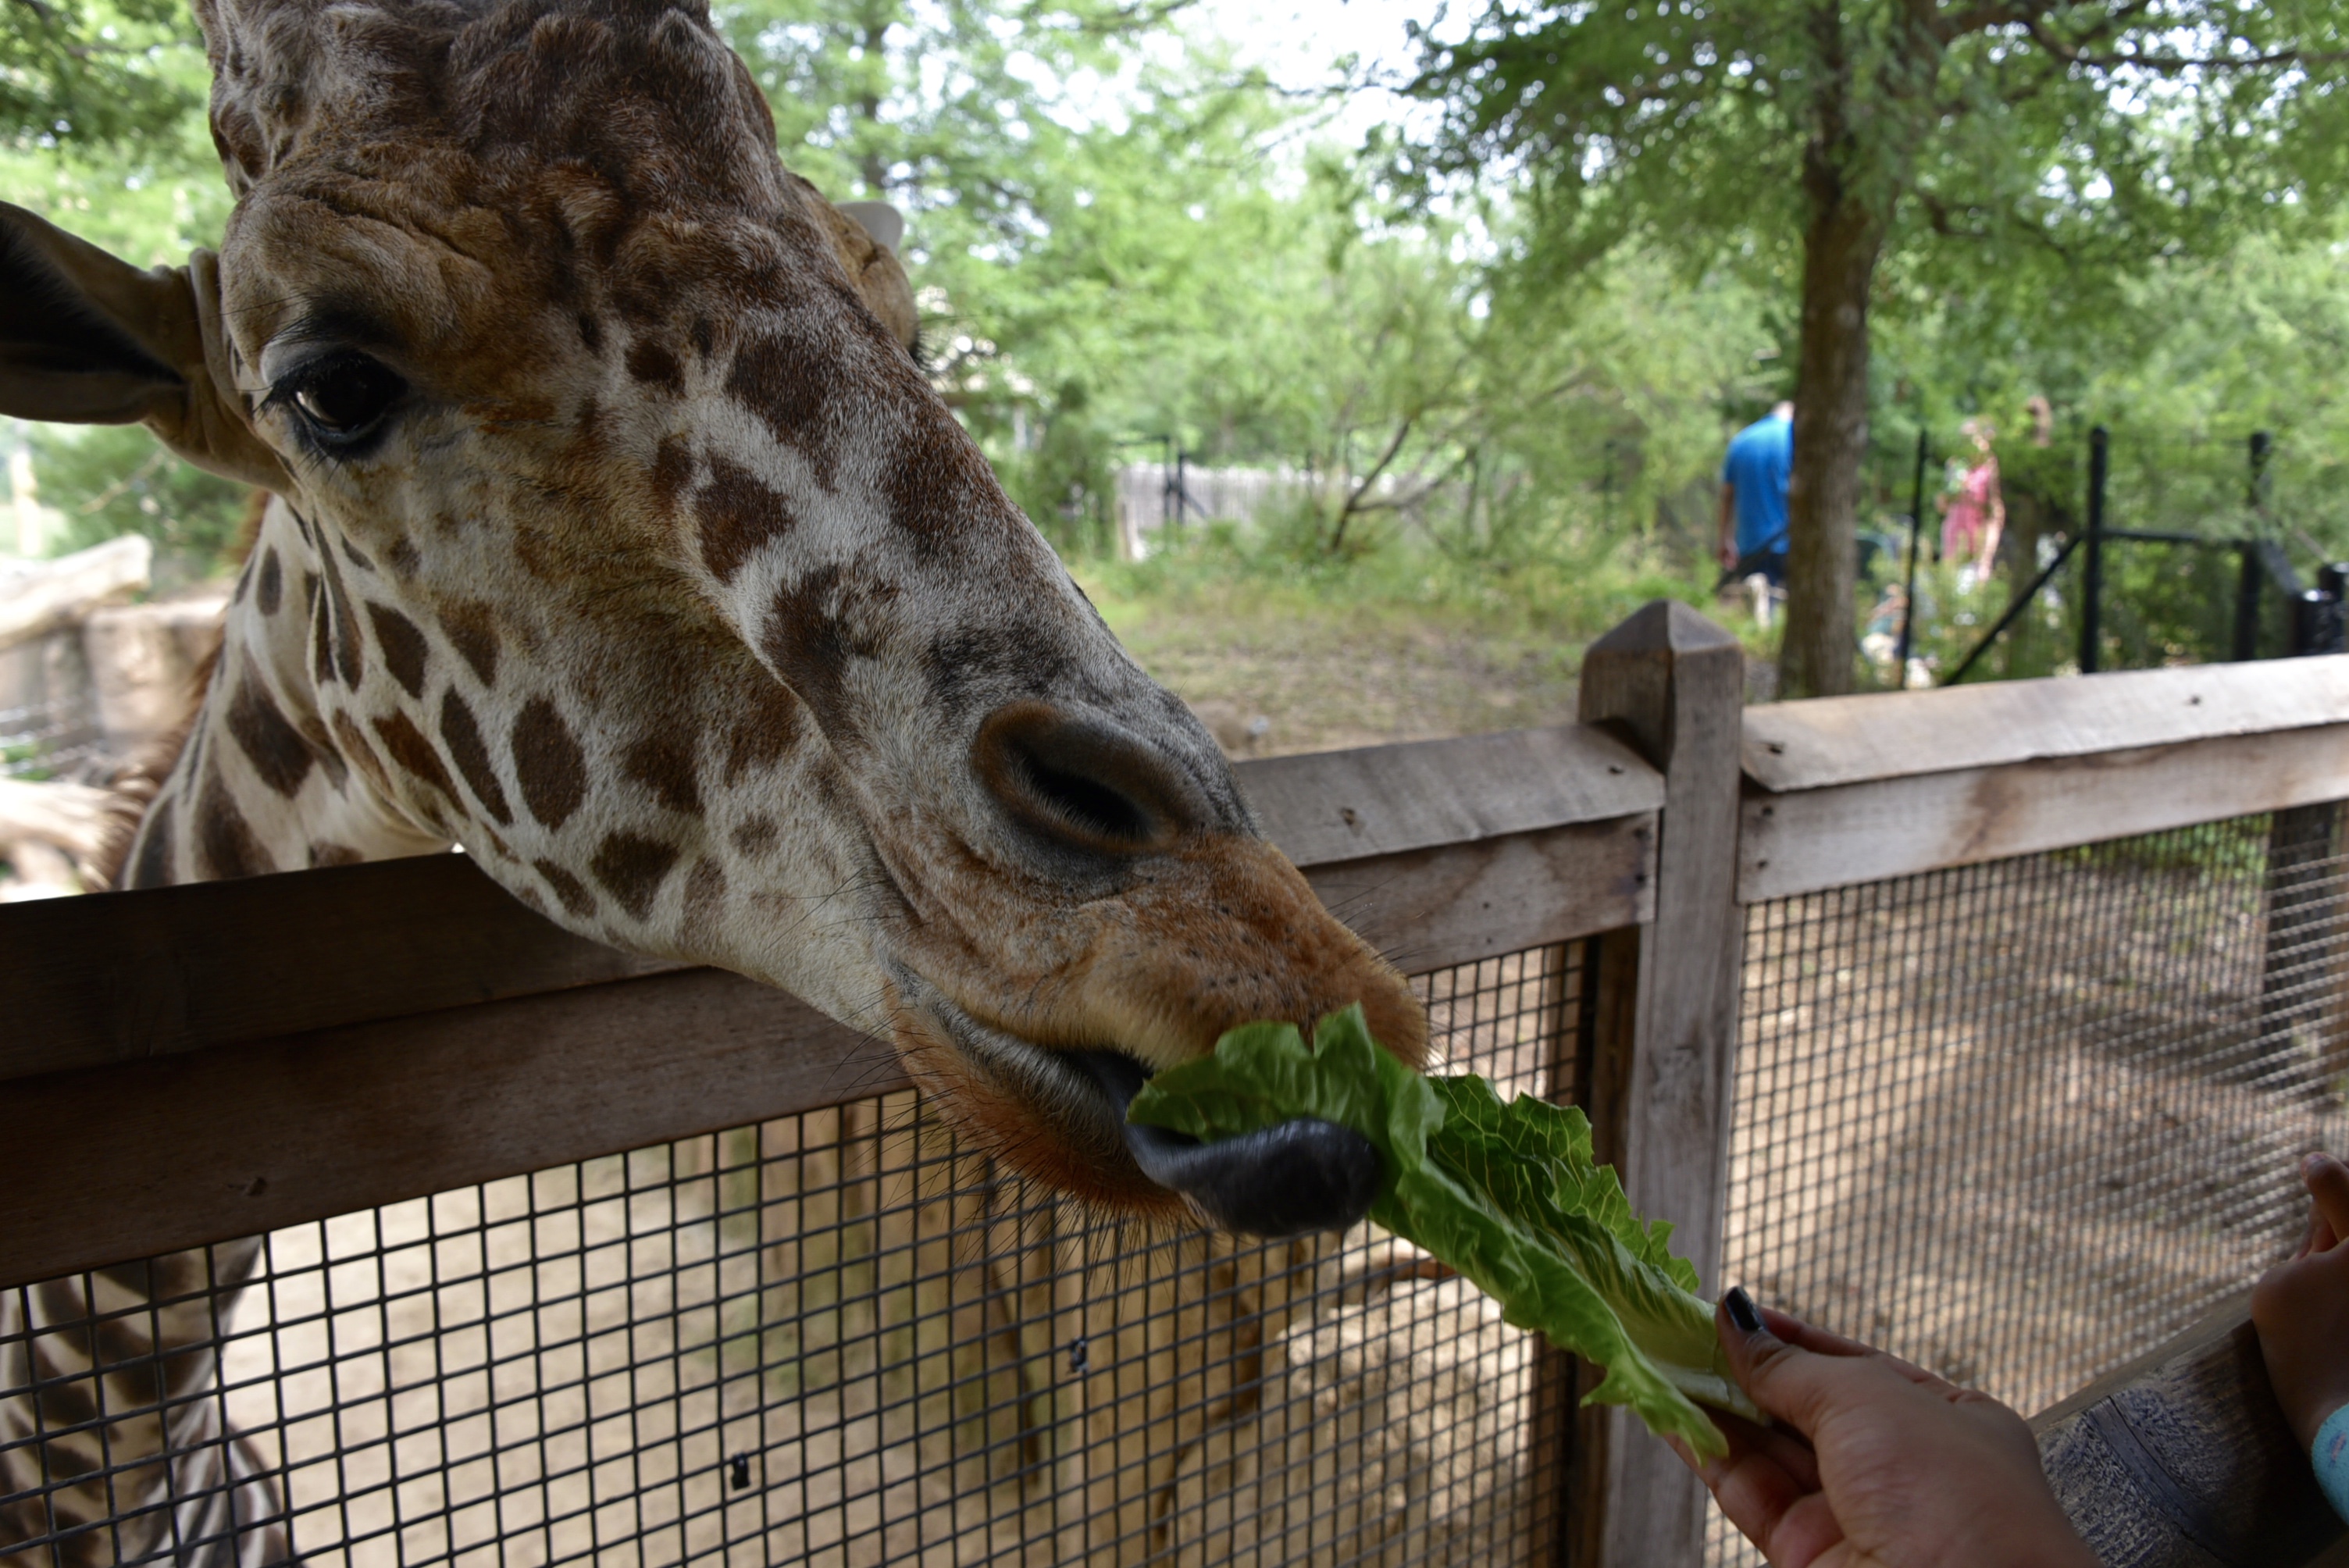 Feed the Giraffe at the Dallas Zoo - 9 Best things to do at the Dallas Zoo - outsidesuburbia.com